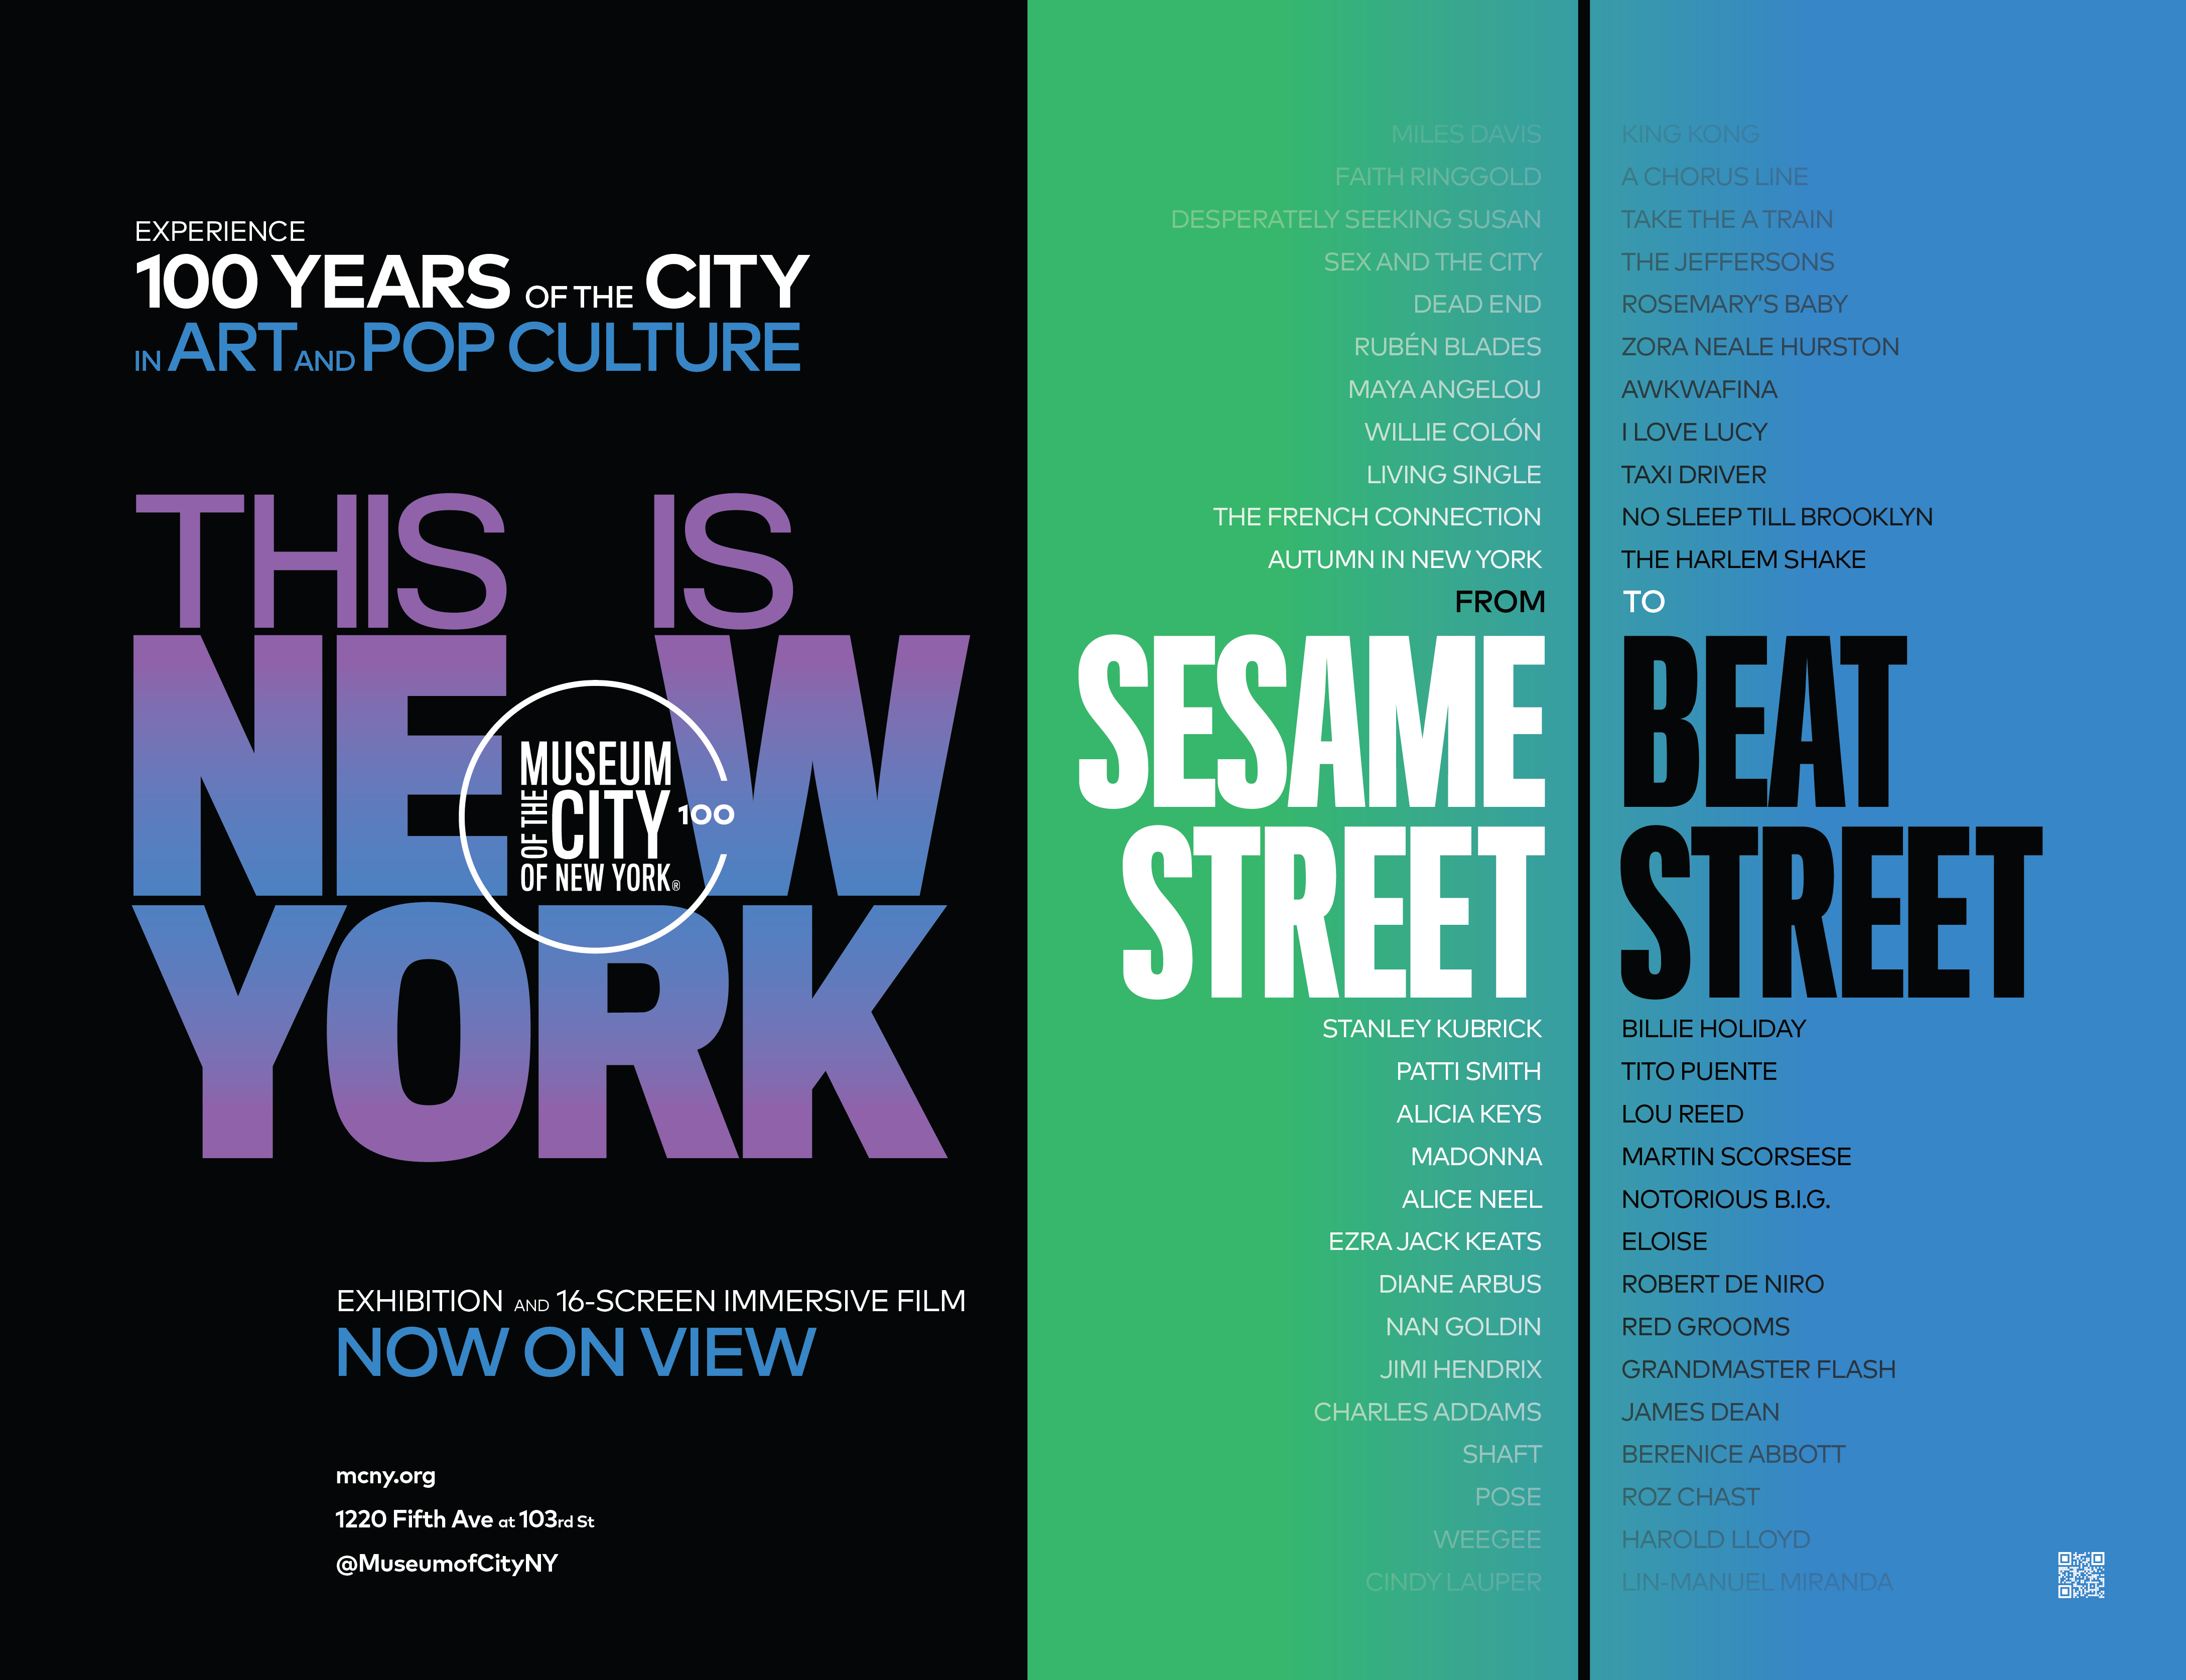 Subway platform ad created for the exhibition "This Is New York" 